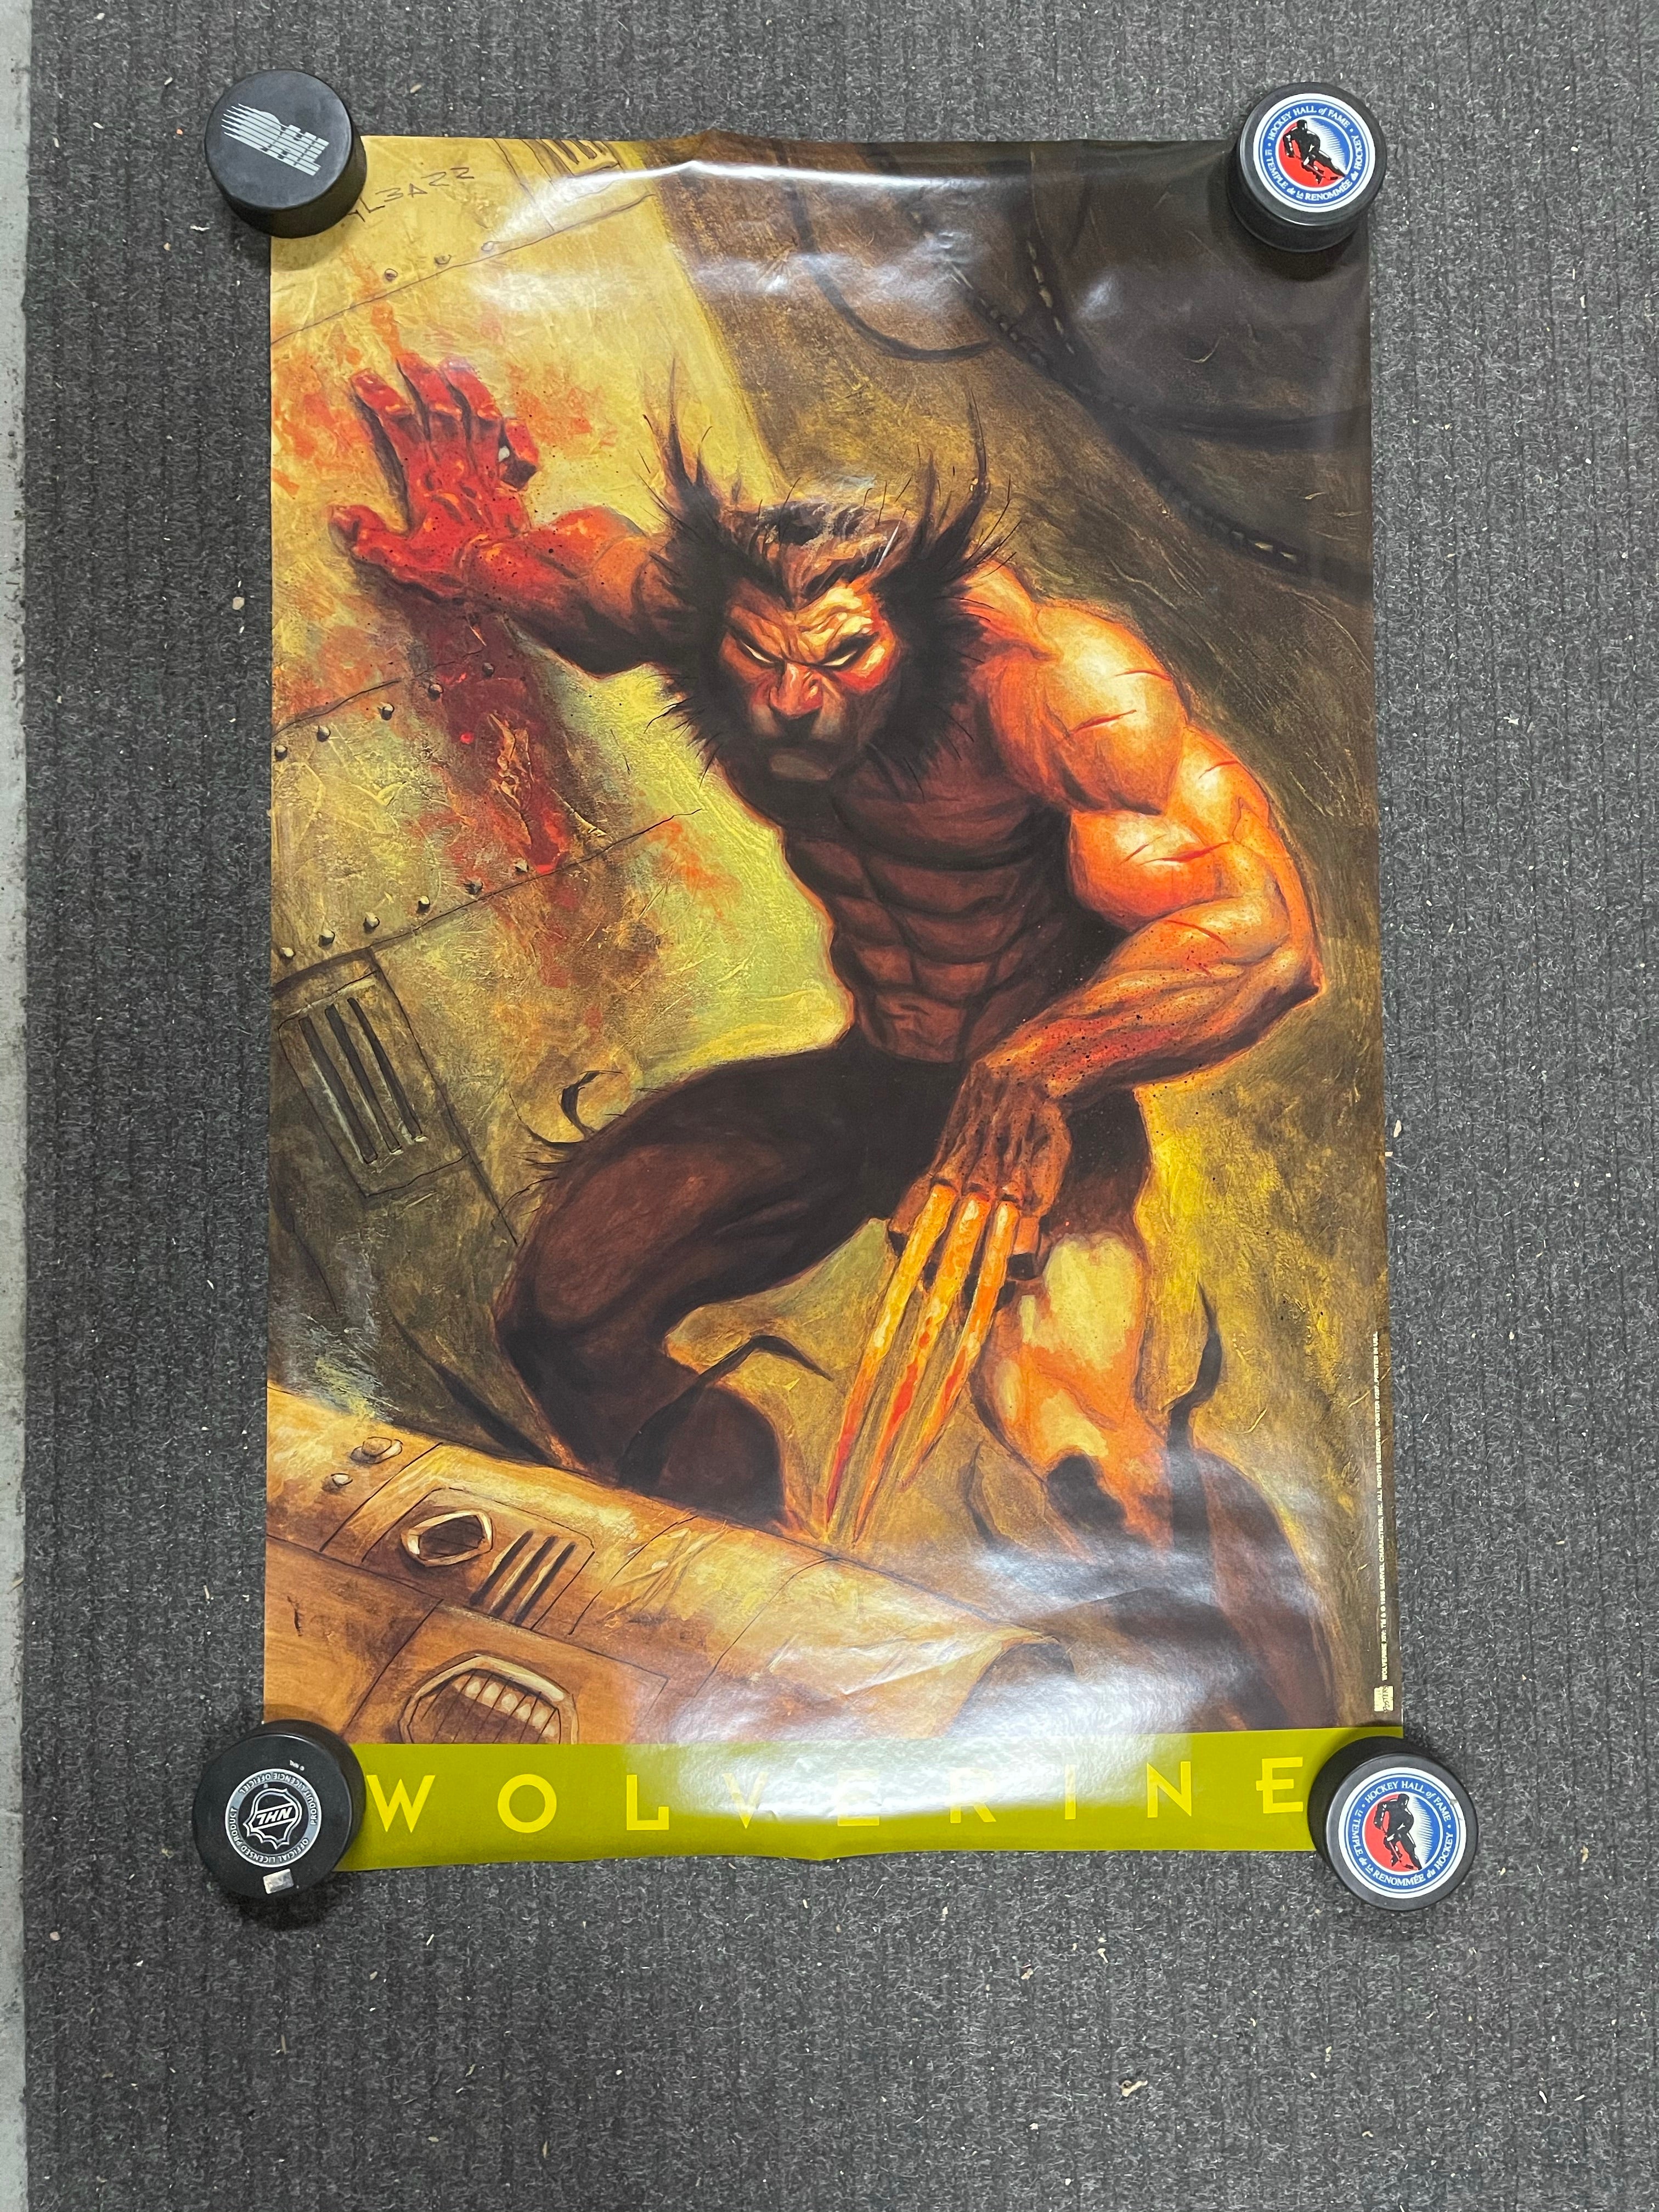 Wolverine vintage comic poster rare find early 1990s